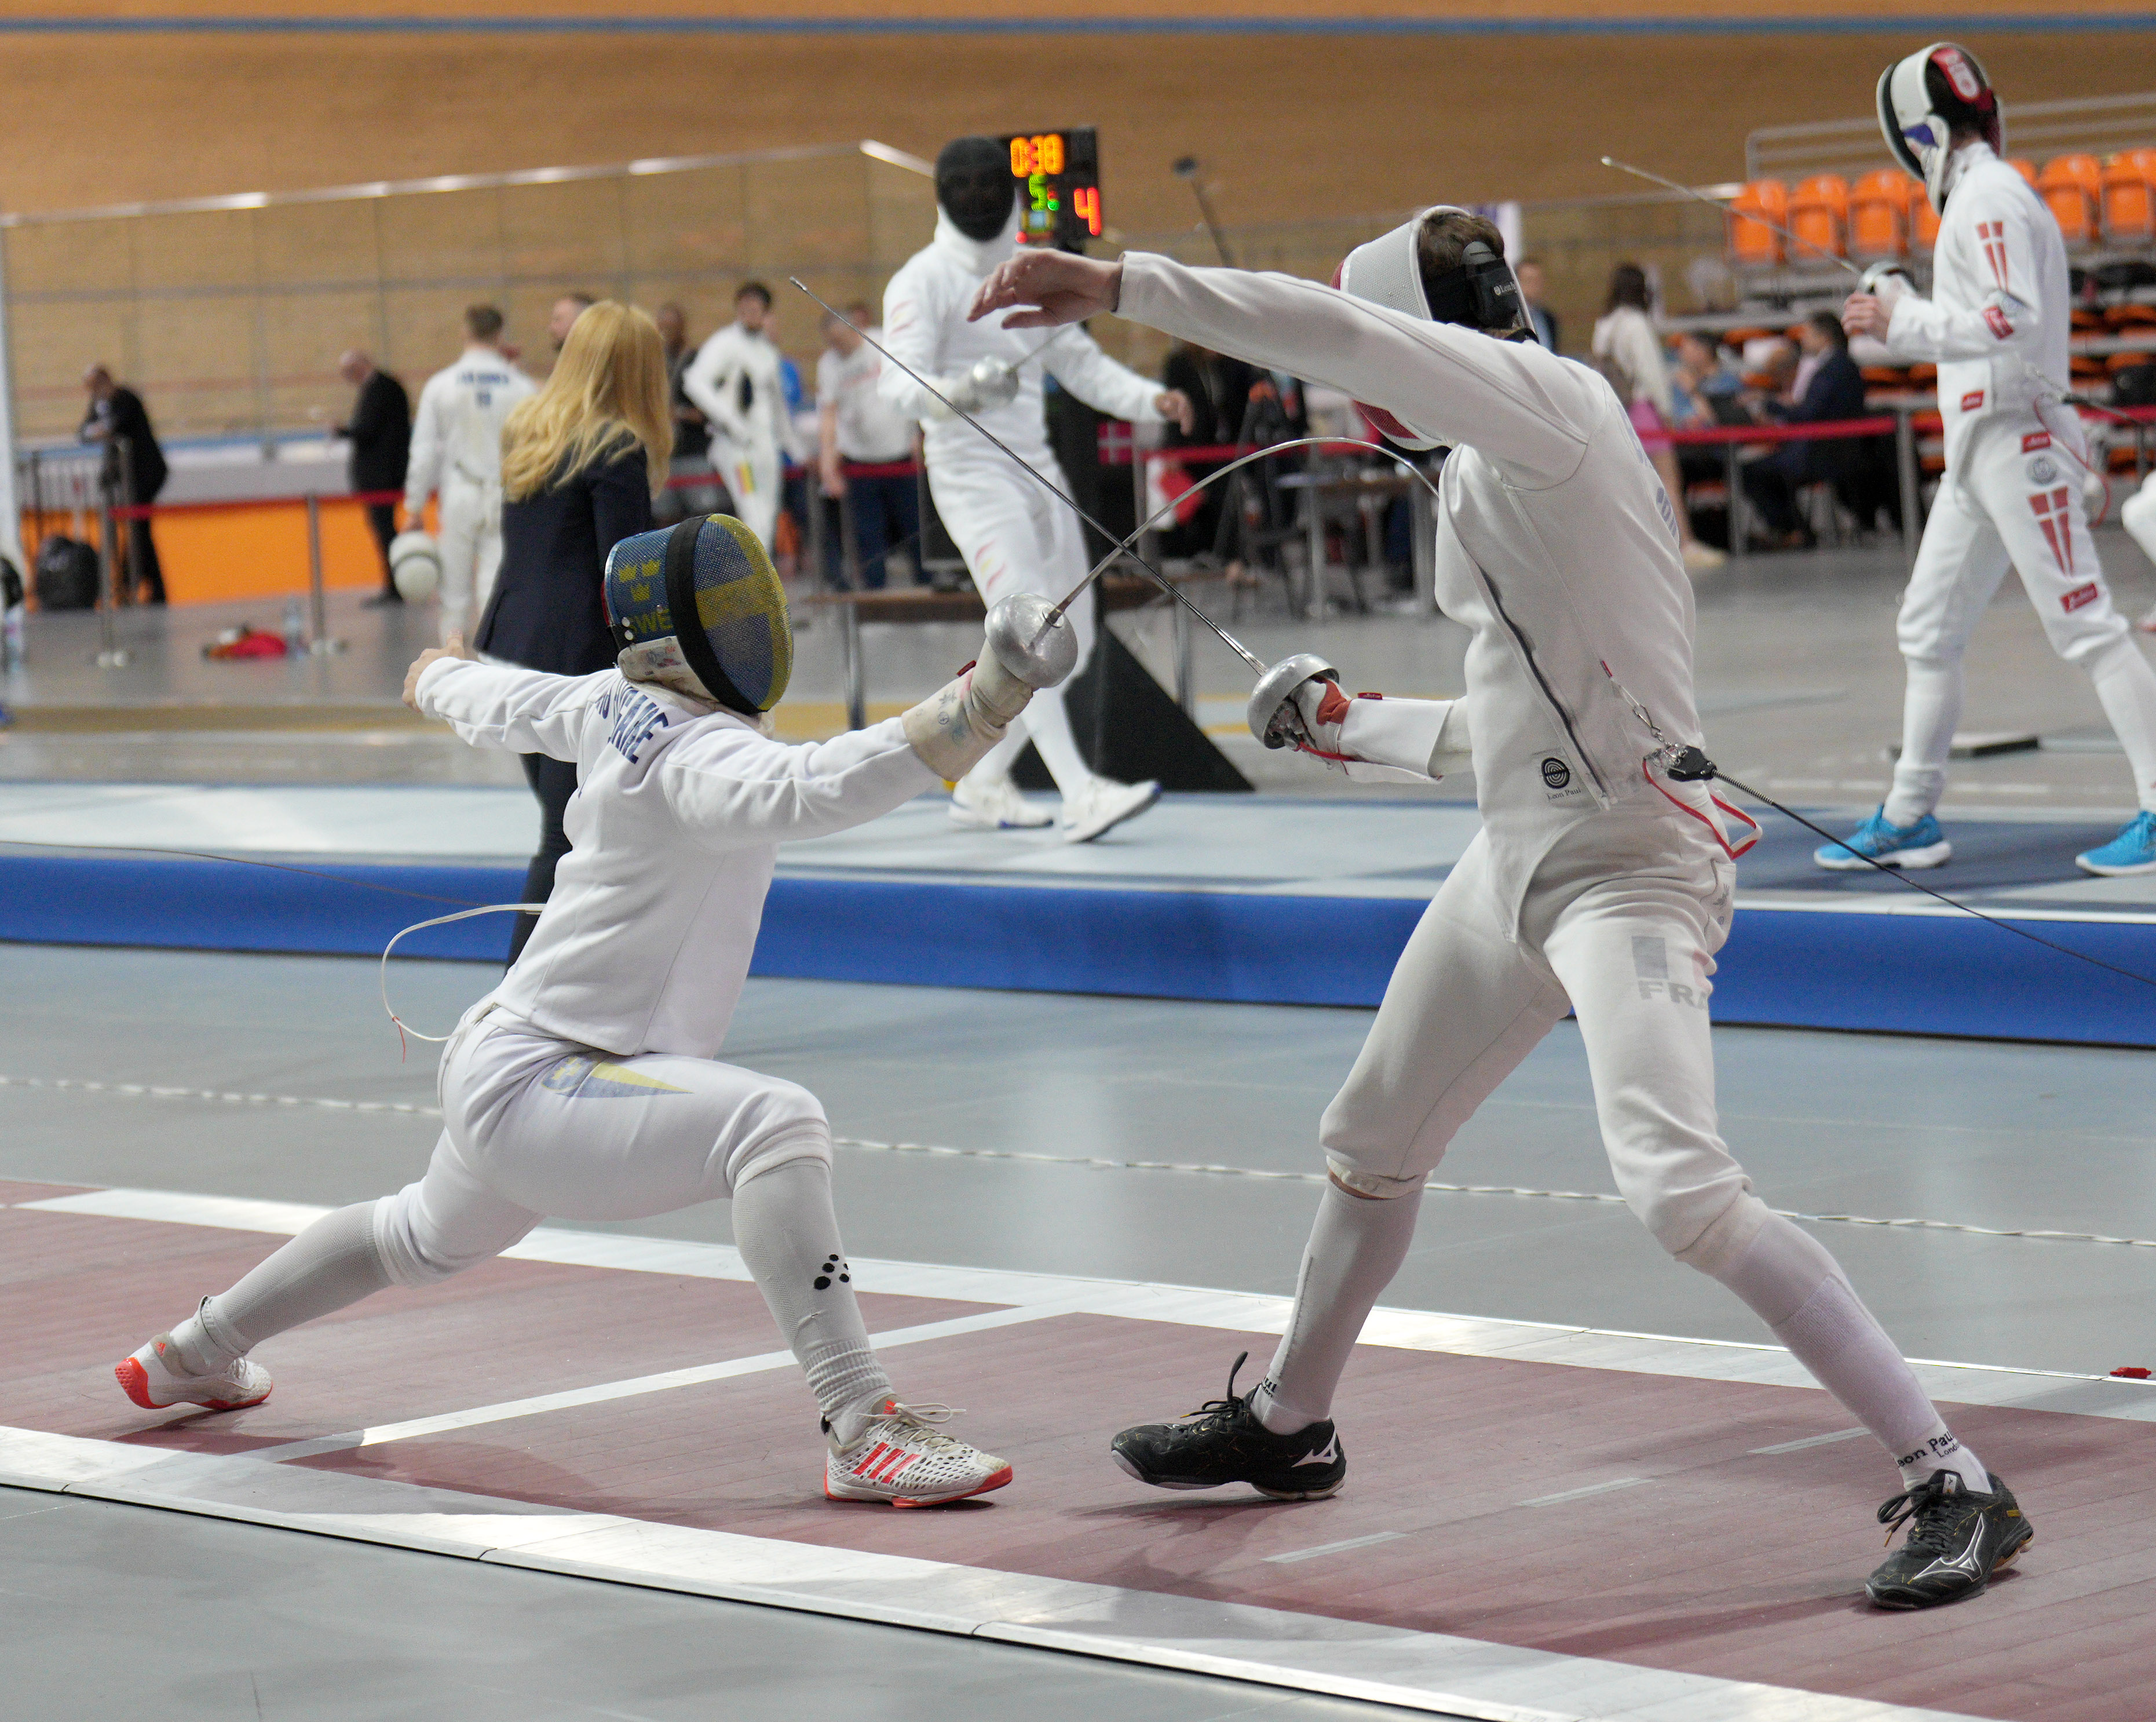 Preview fencing day 3 – men’s epee and women’s sabre